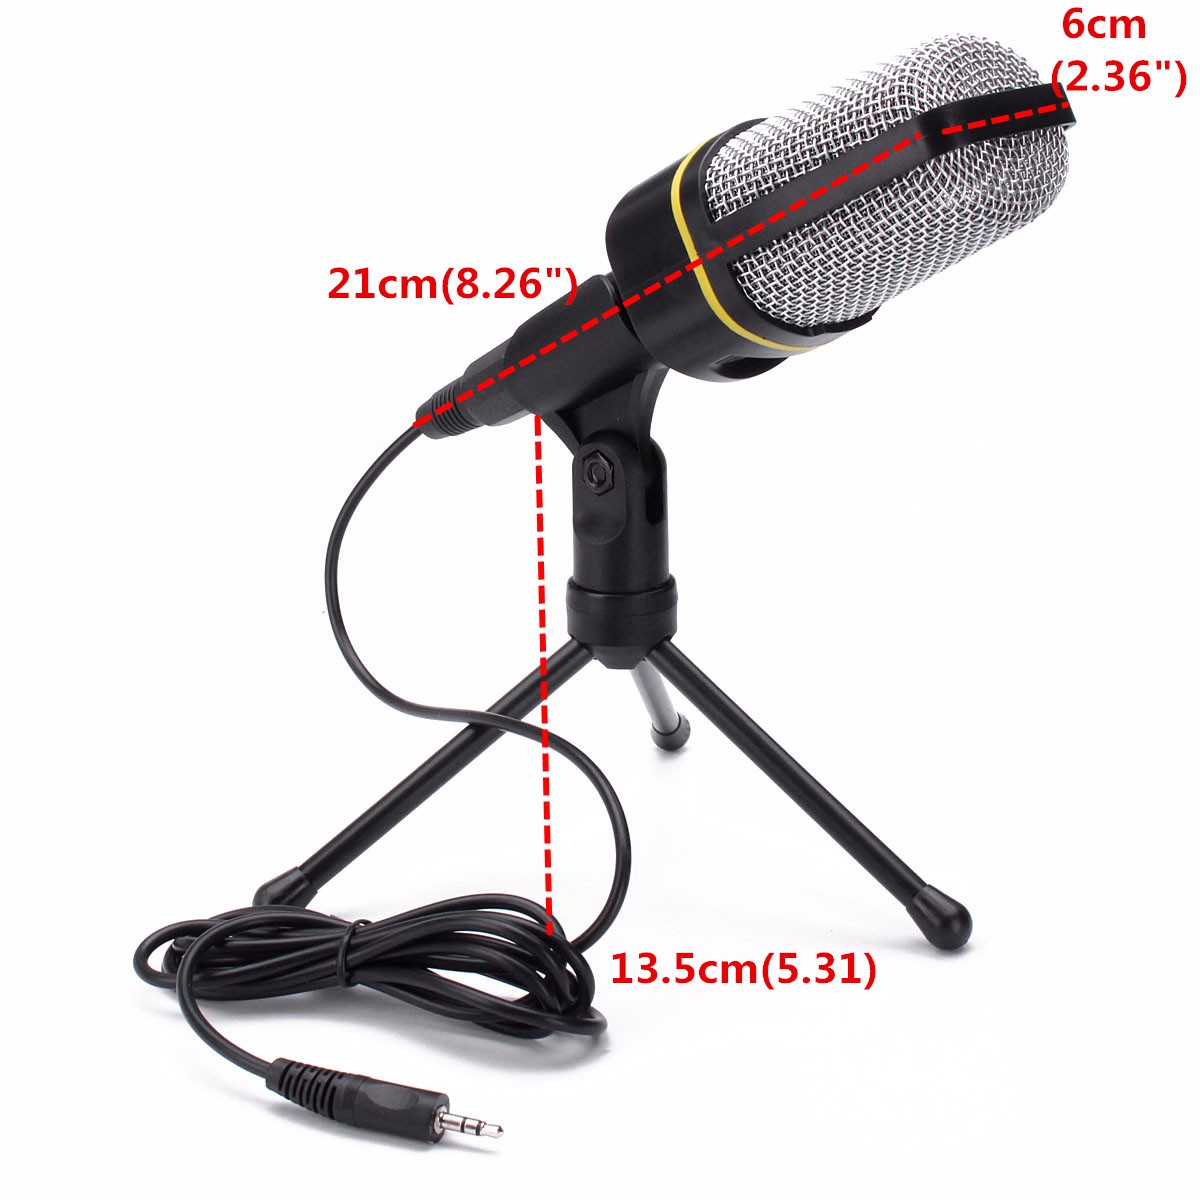 35-mm-Condenser-Microphone-Mic-For-MSN-Skype-Singing-Recording-Laptop-Notebook-PC-1109293